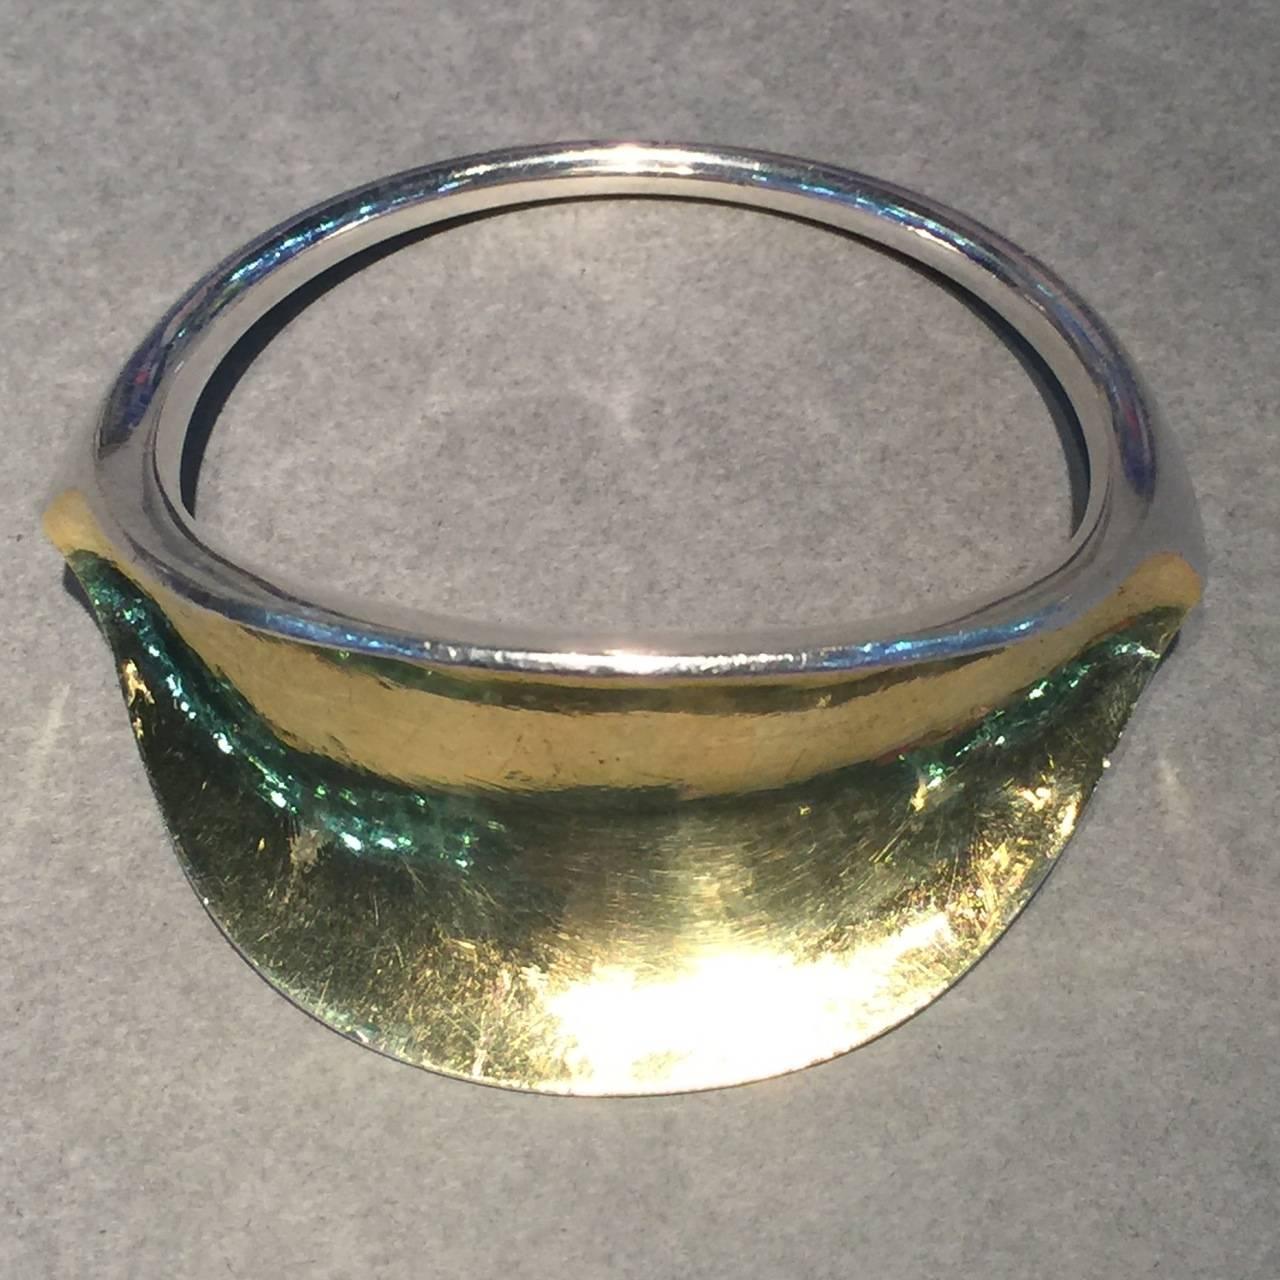 Hans Hansen Sterling Silver Modernist Bangle No. 251, Very Rare 

Stunning, hand wrought bangle with gilt interior. Very hard to find and a true conversation piece.

This bangle is heavy and in very good condition.

Weight is 84 grams / 3